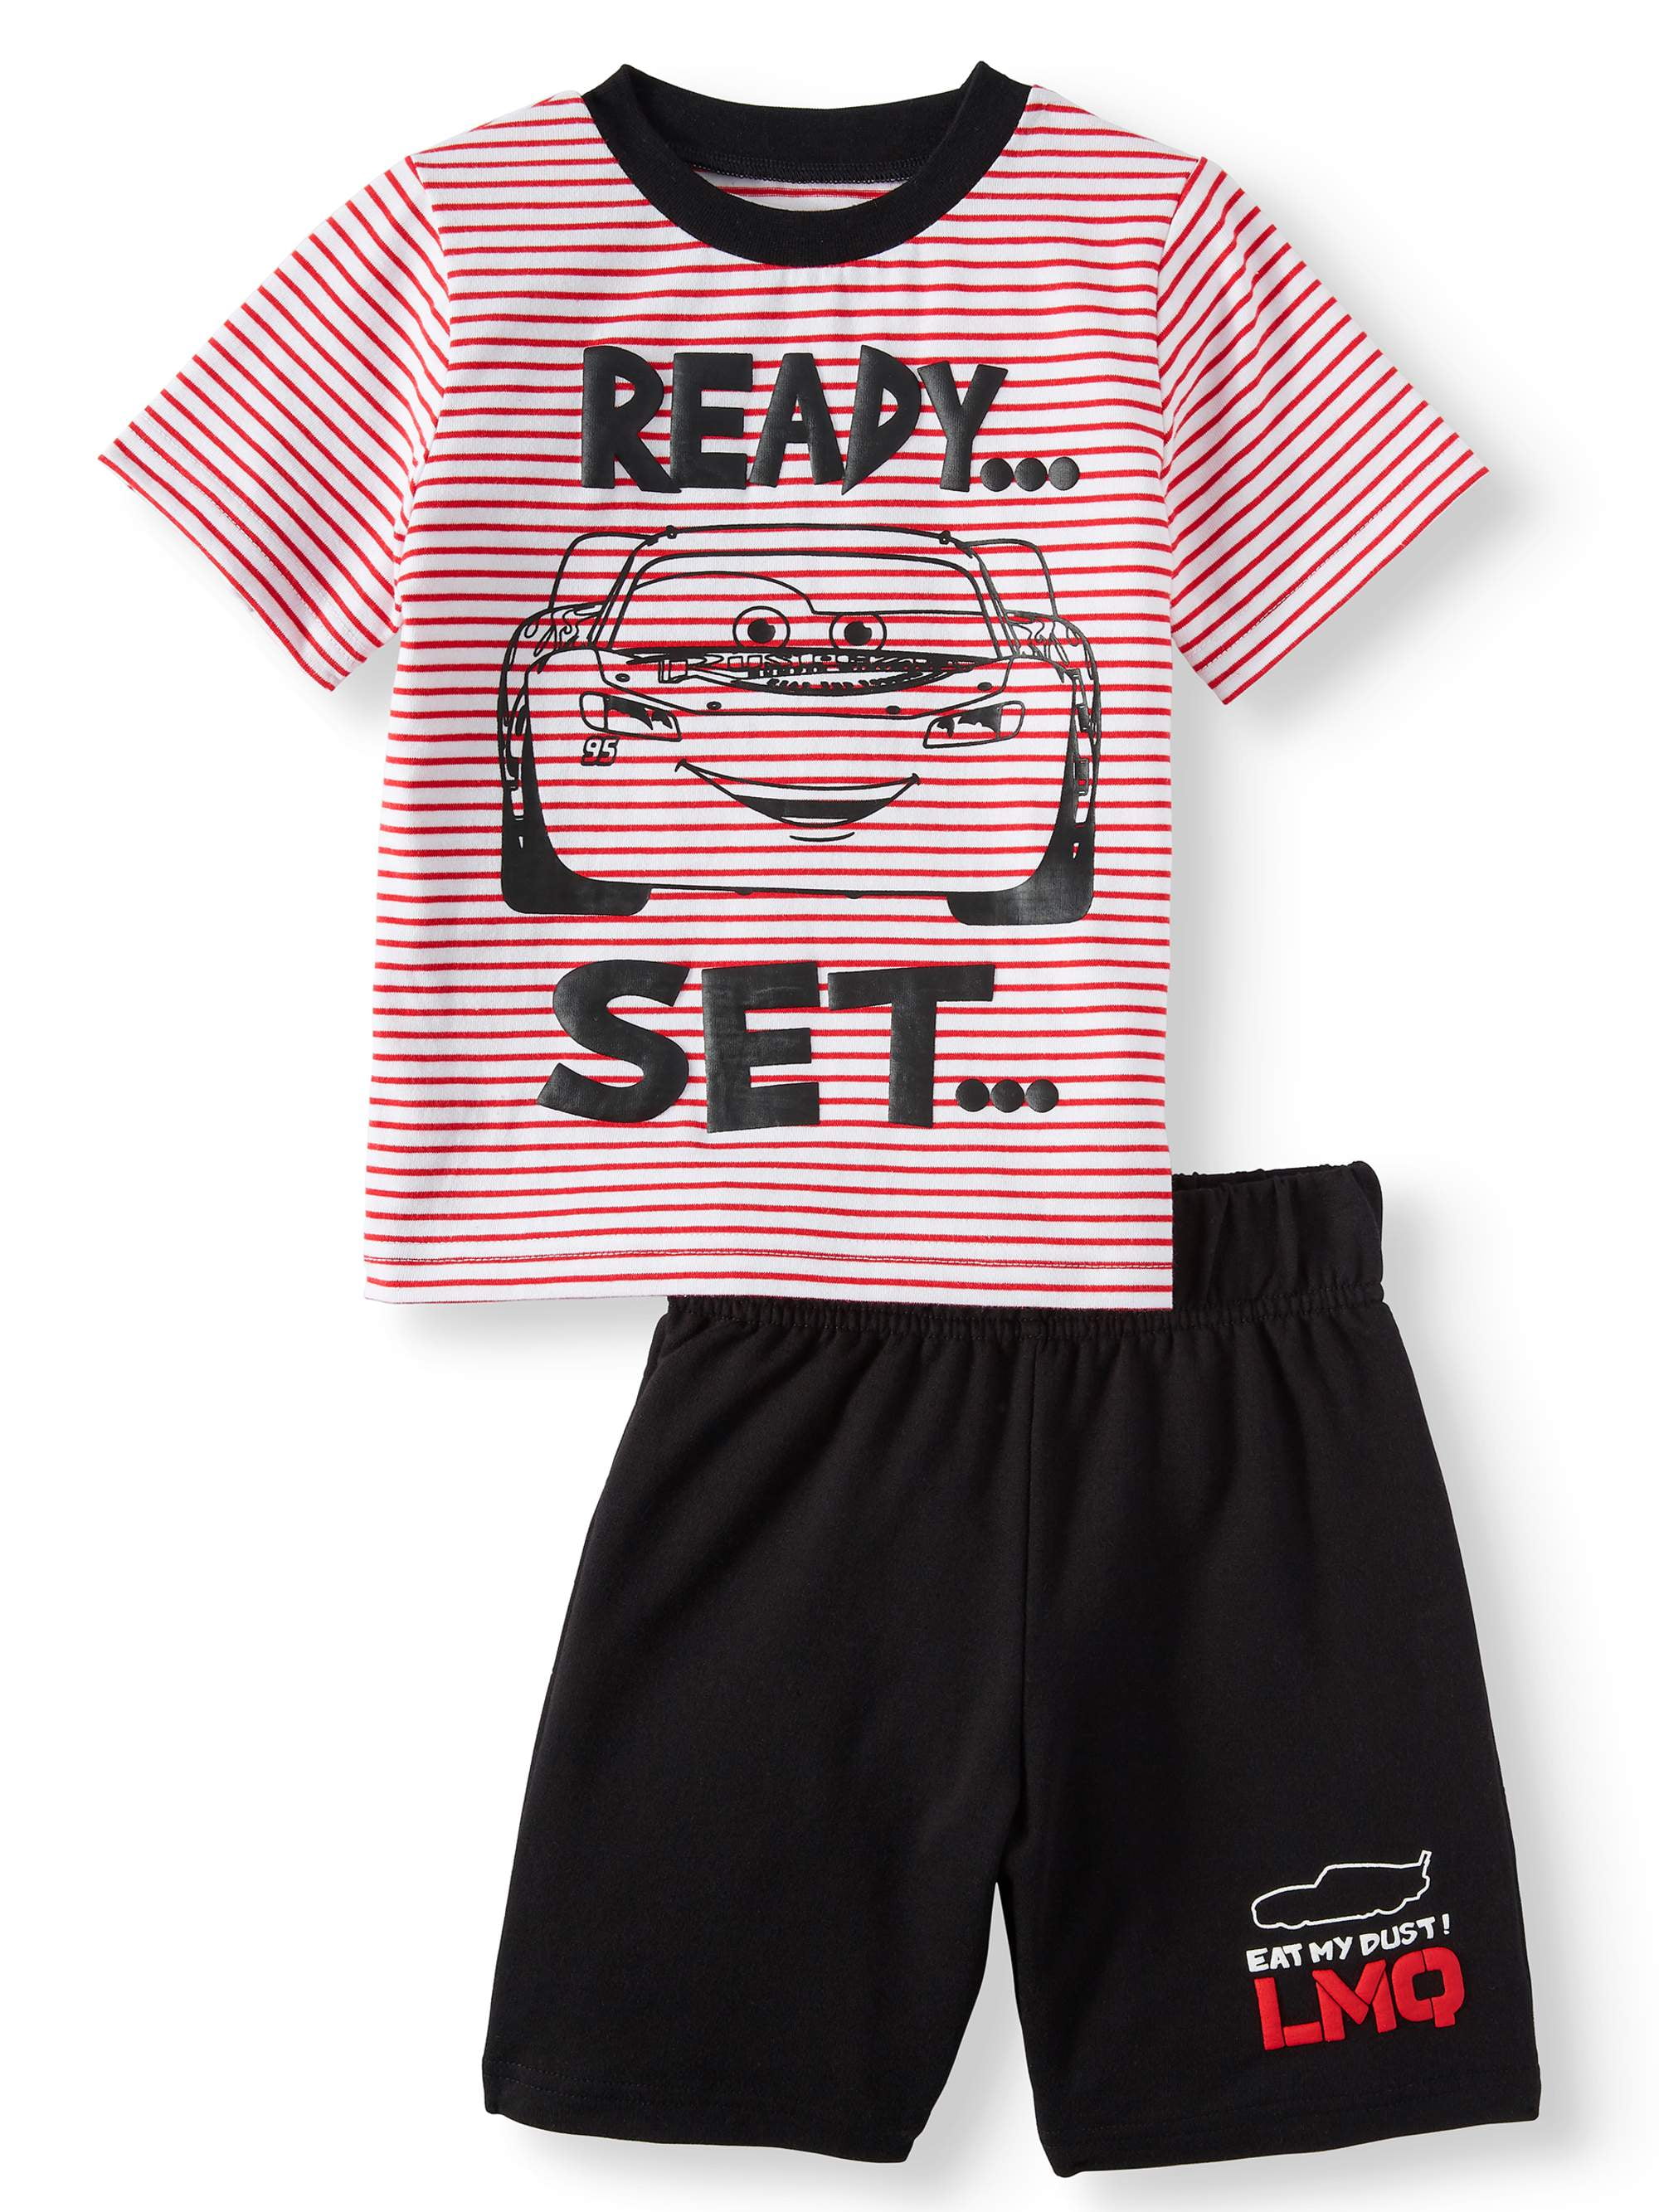 JollyRascals Boys Summer Set Short Sleeve T-Shirt Tee Top and Shorts Kids New Cars Outfit Set 2 Piece Black Blue Grey White Age 2 3 4 5 6 7 8 9 10 Years